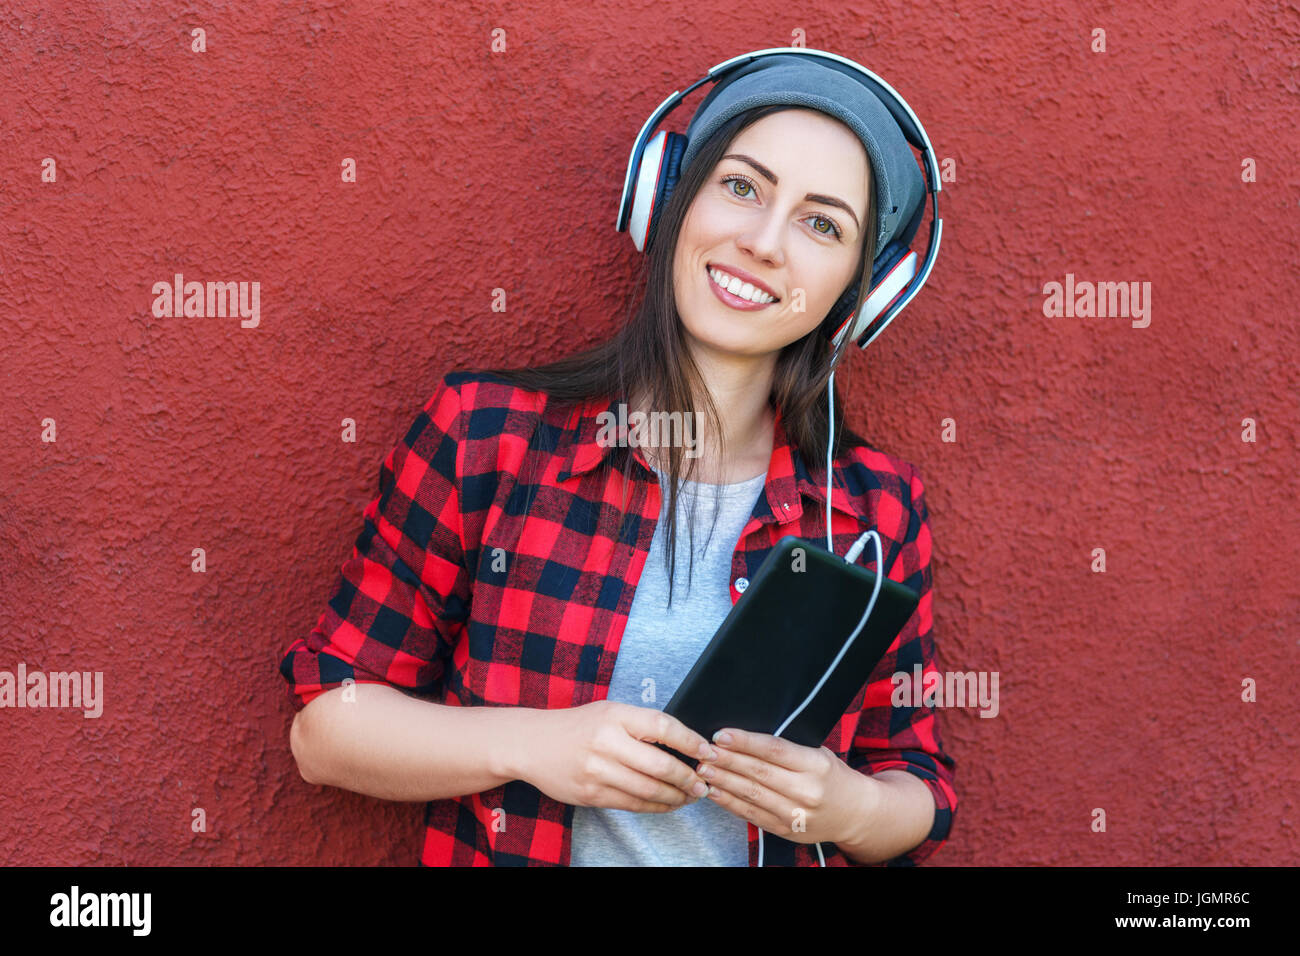 young woman holding tablet computer and listening music in headphones. Girl using digital tablet outdoors. Copy space. Technology, music, lifestyle, a Stock Photo